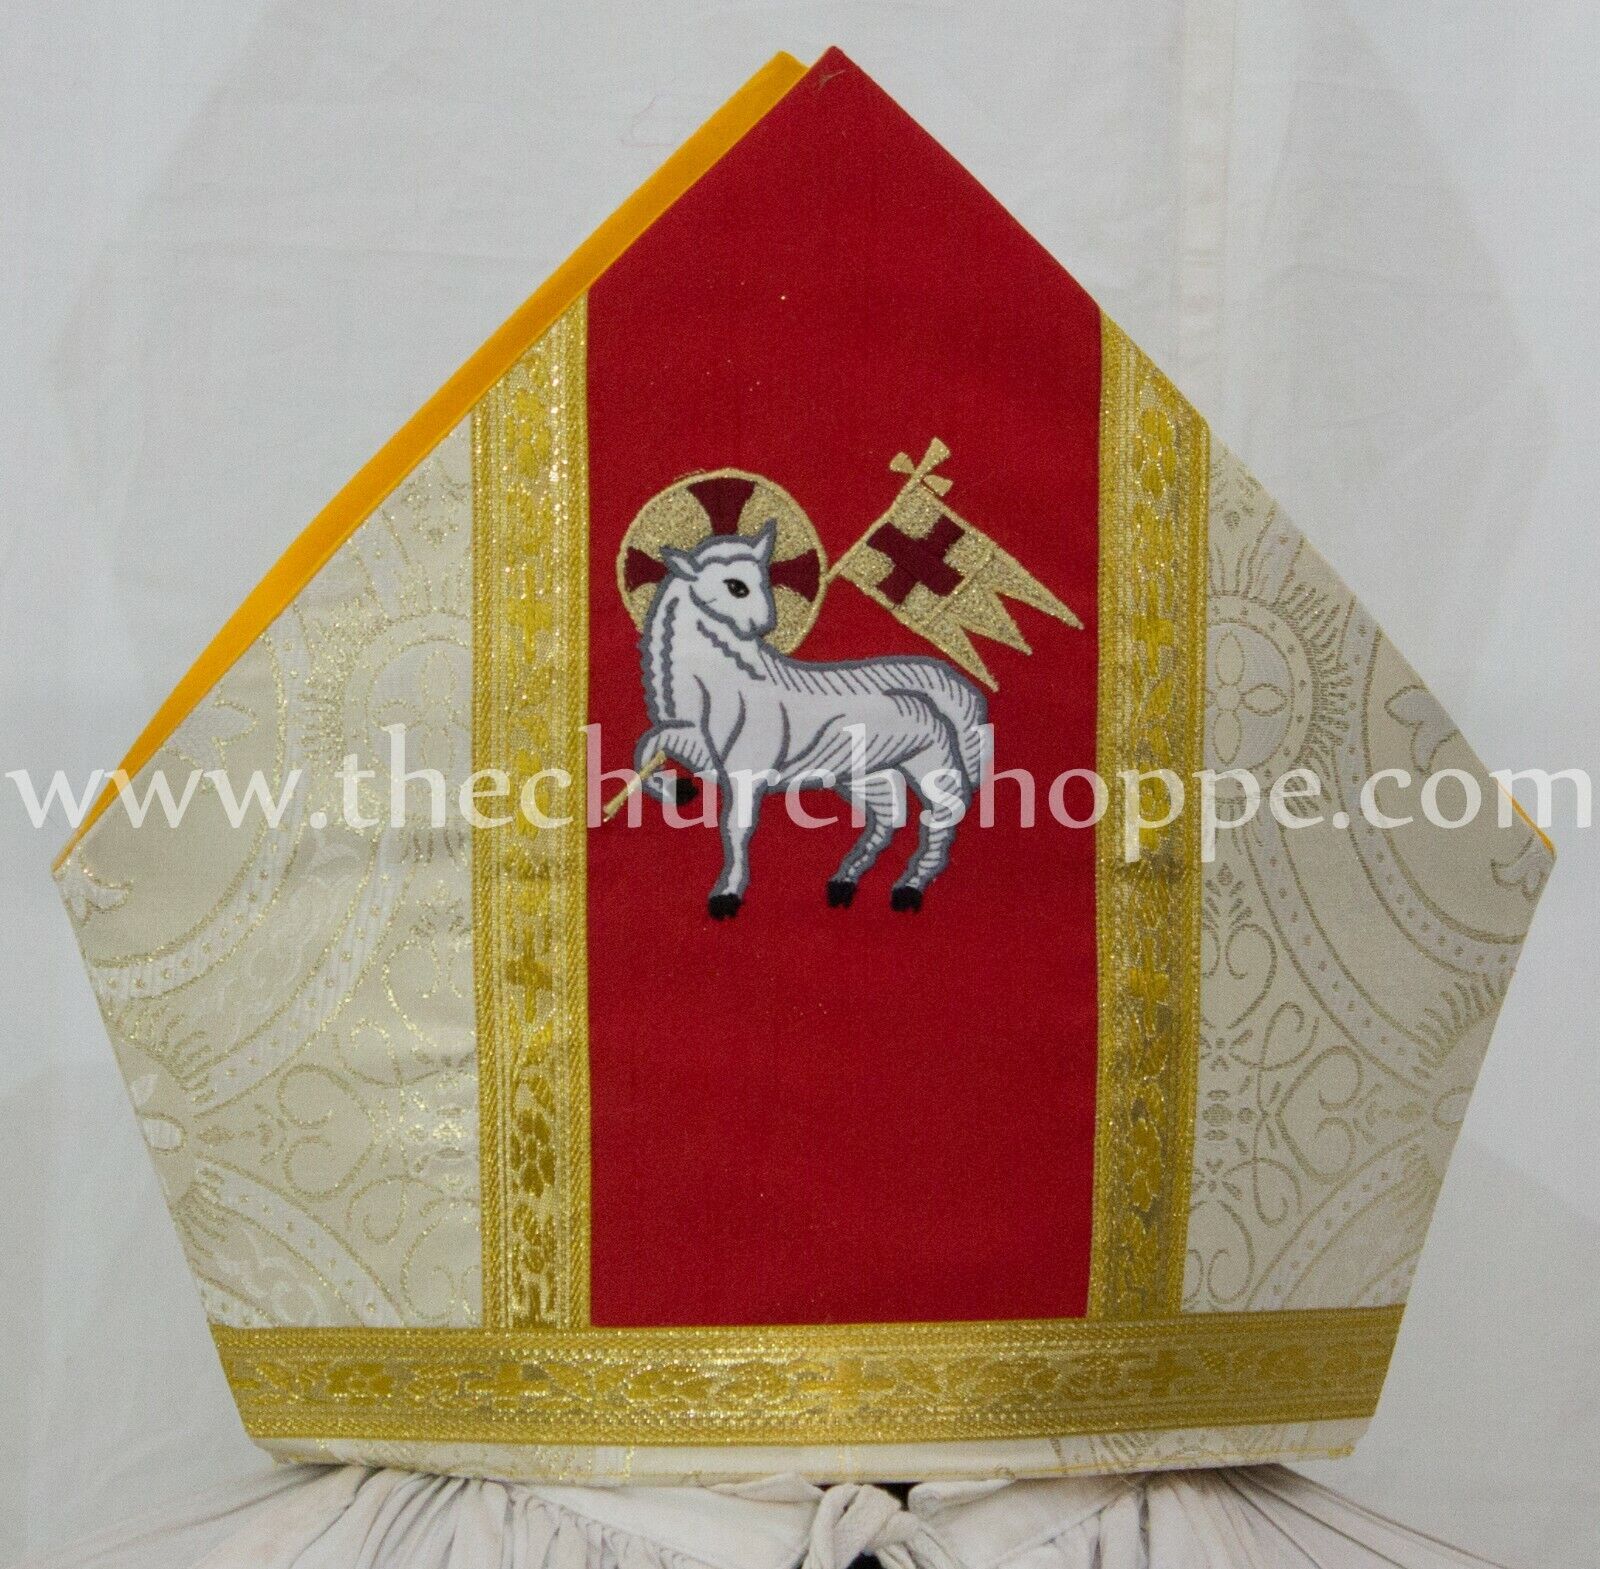 New Metallic Gold Mitre with Agnus Dei embroidery,mitra,Bishop's Mitre